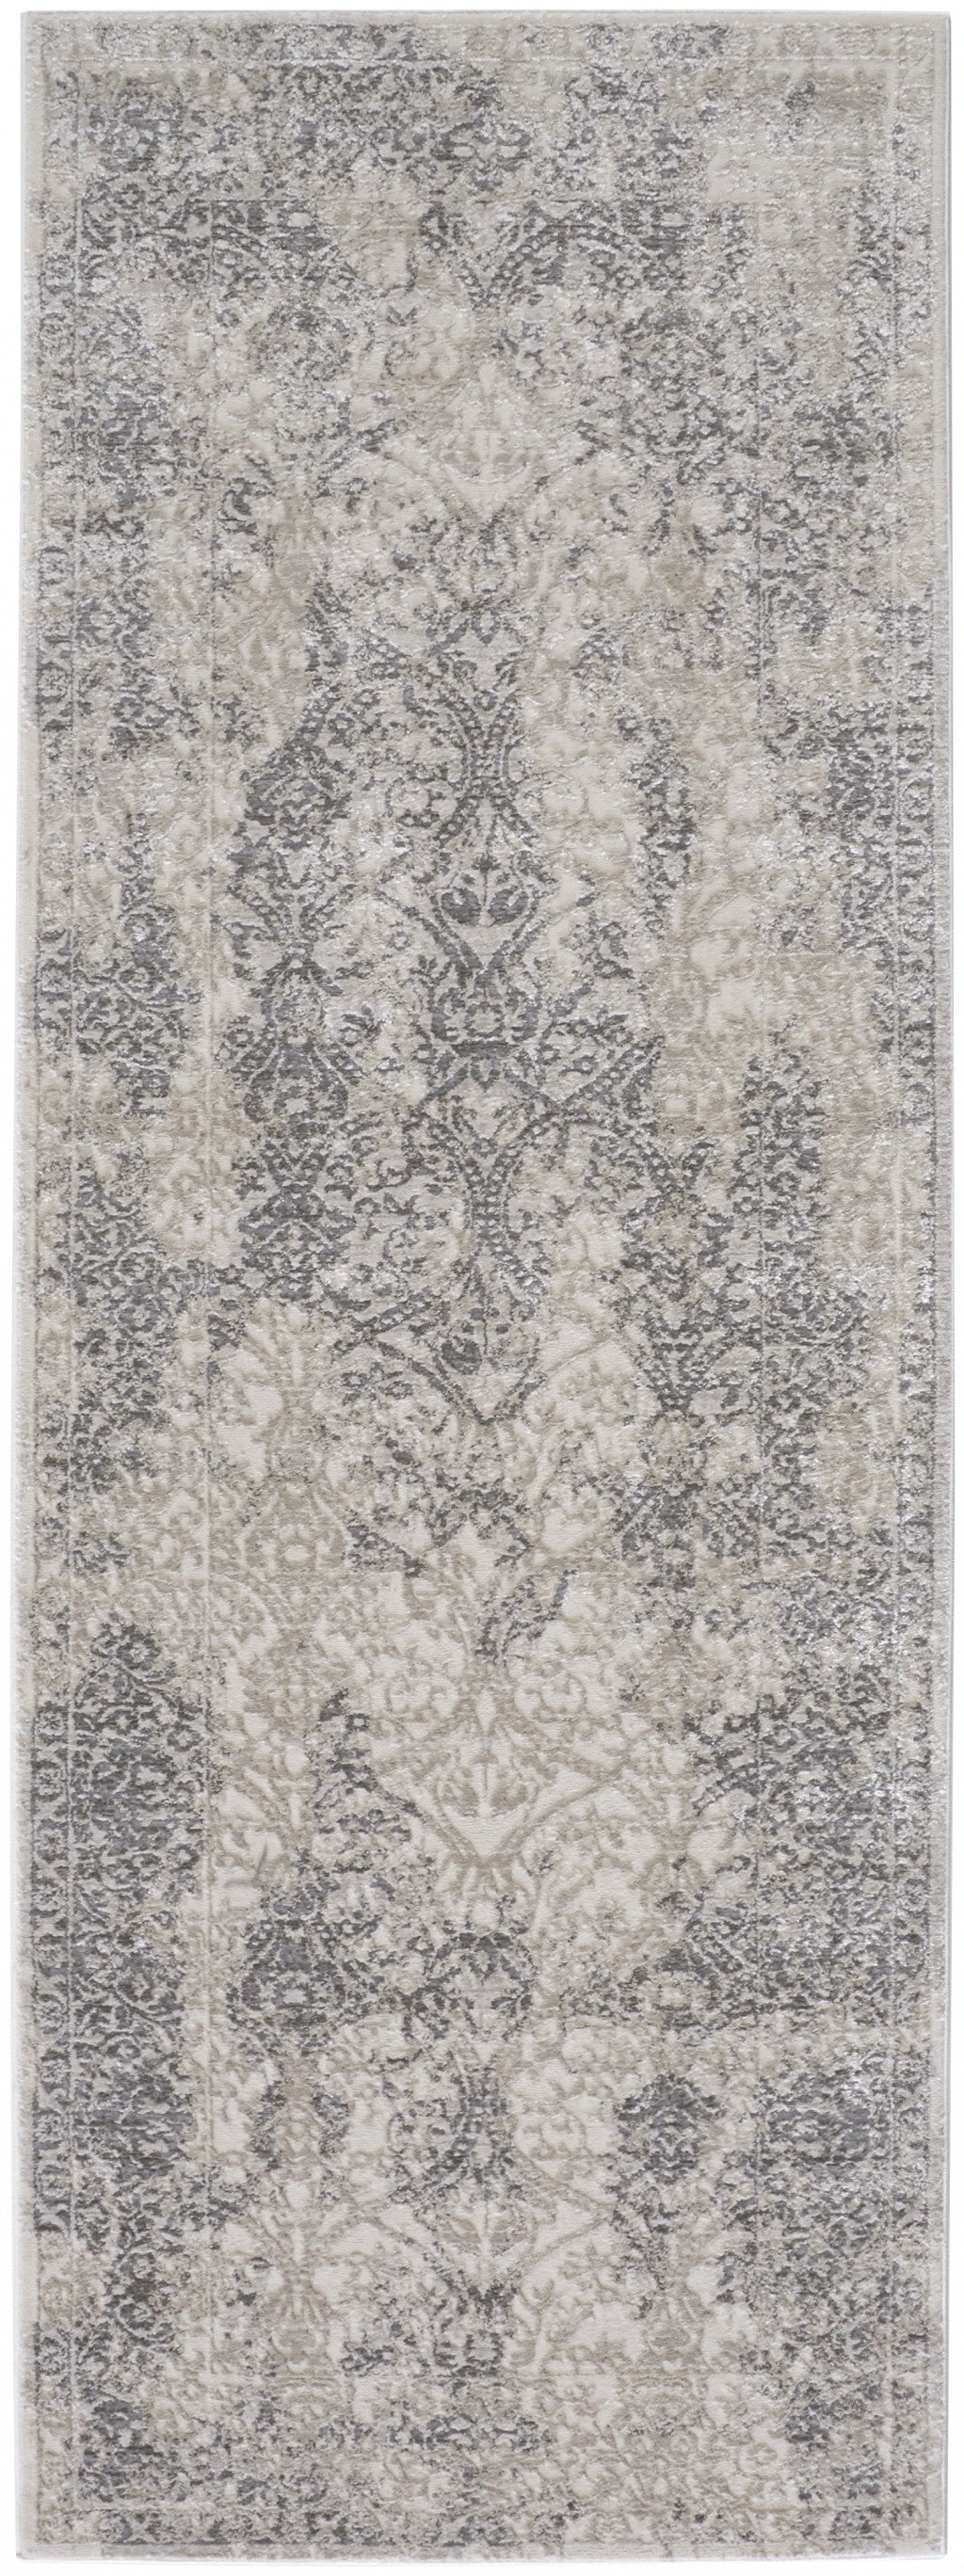 5' X 8' Ivory Gray And Black Abstract Stain Resistant Area Rug